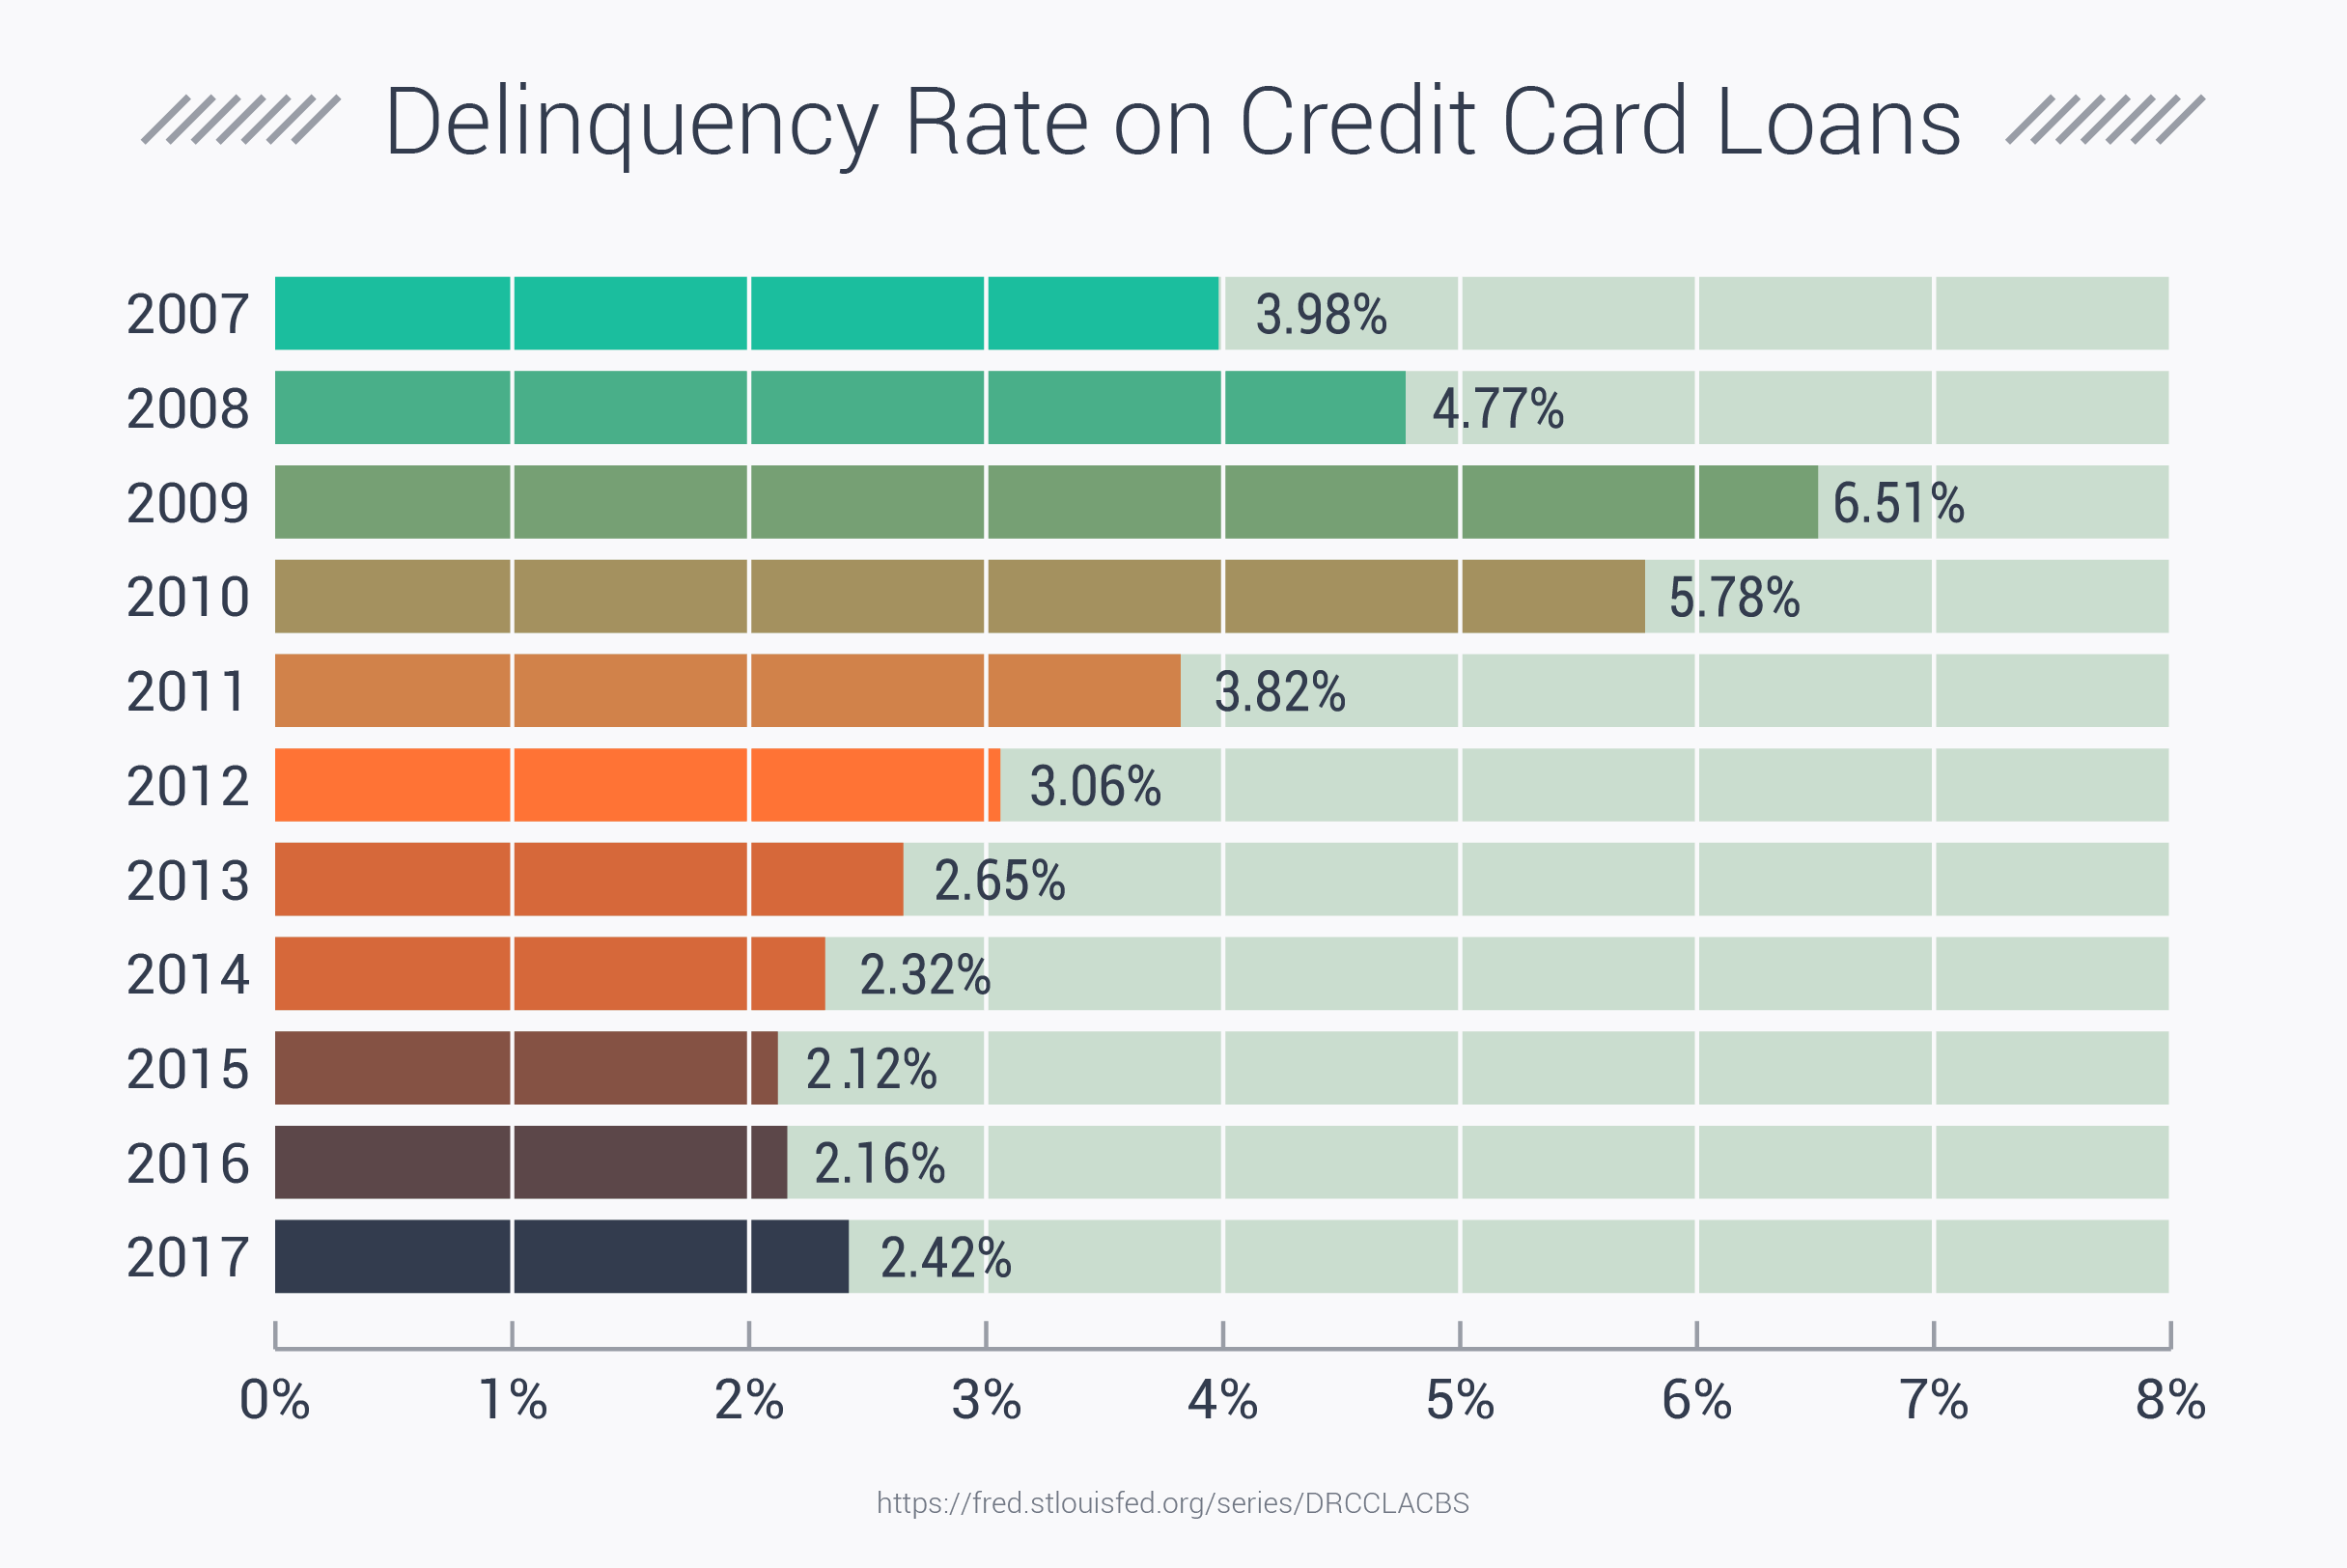 Delinquency Rate on Credit Card Loans